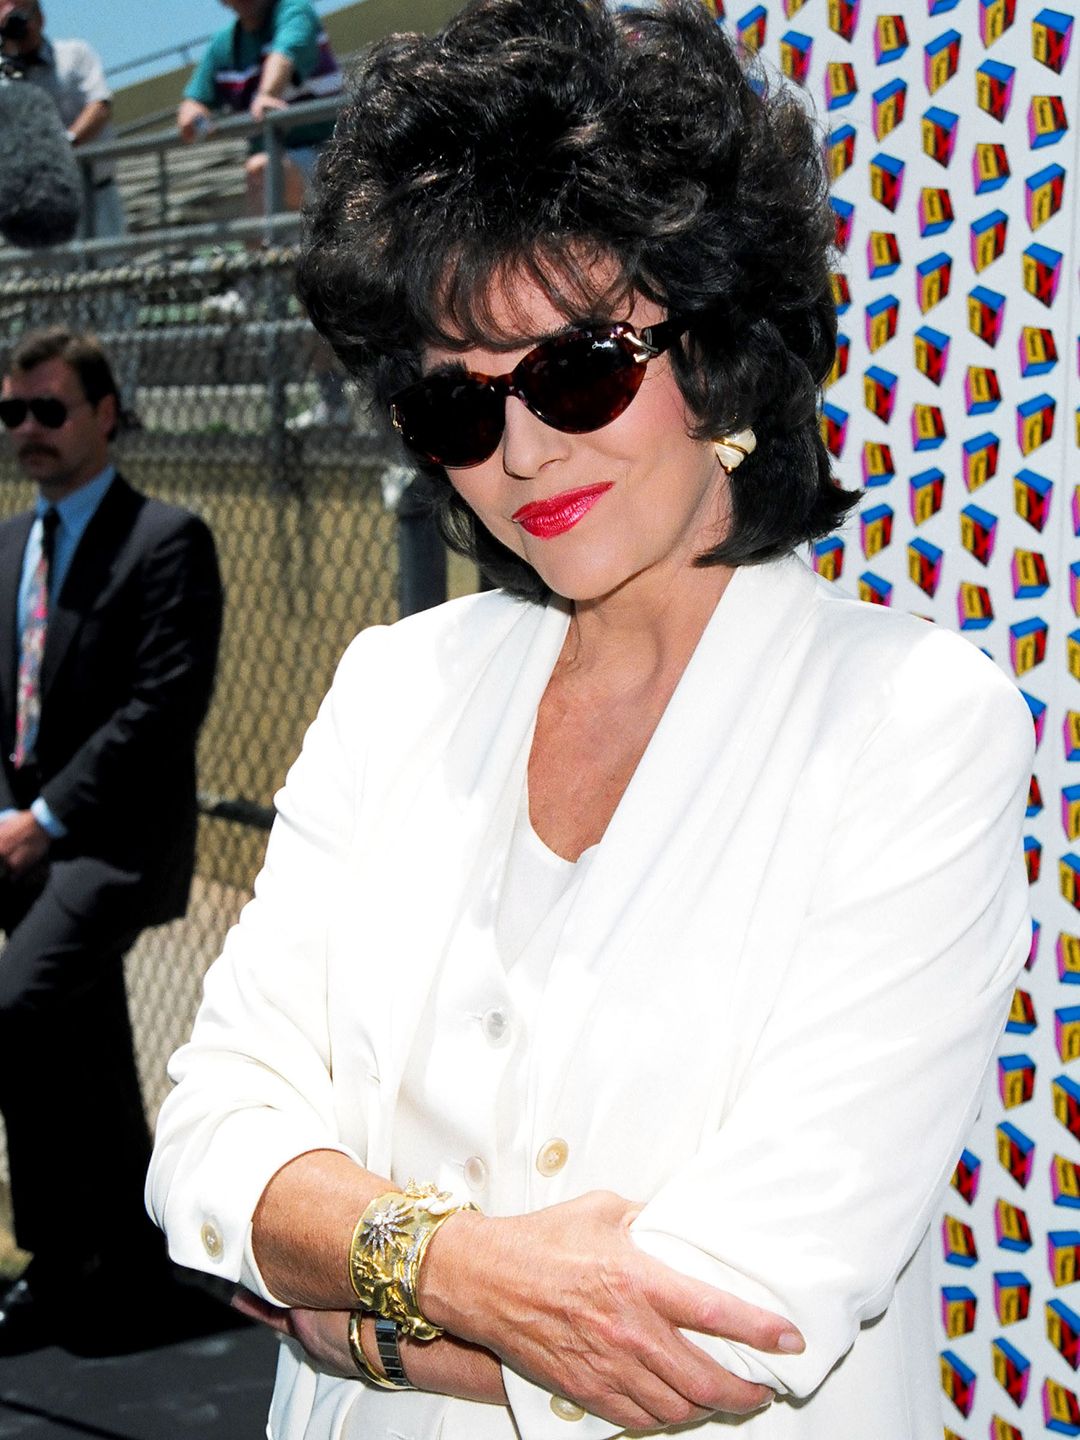 Joan Collins smiling in sunglasses a white suit and red lipstick at an event